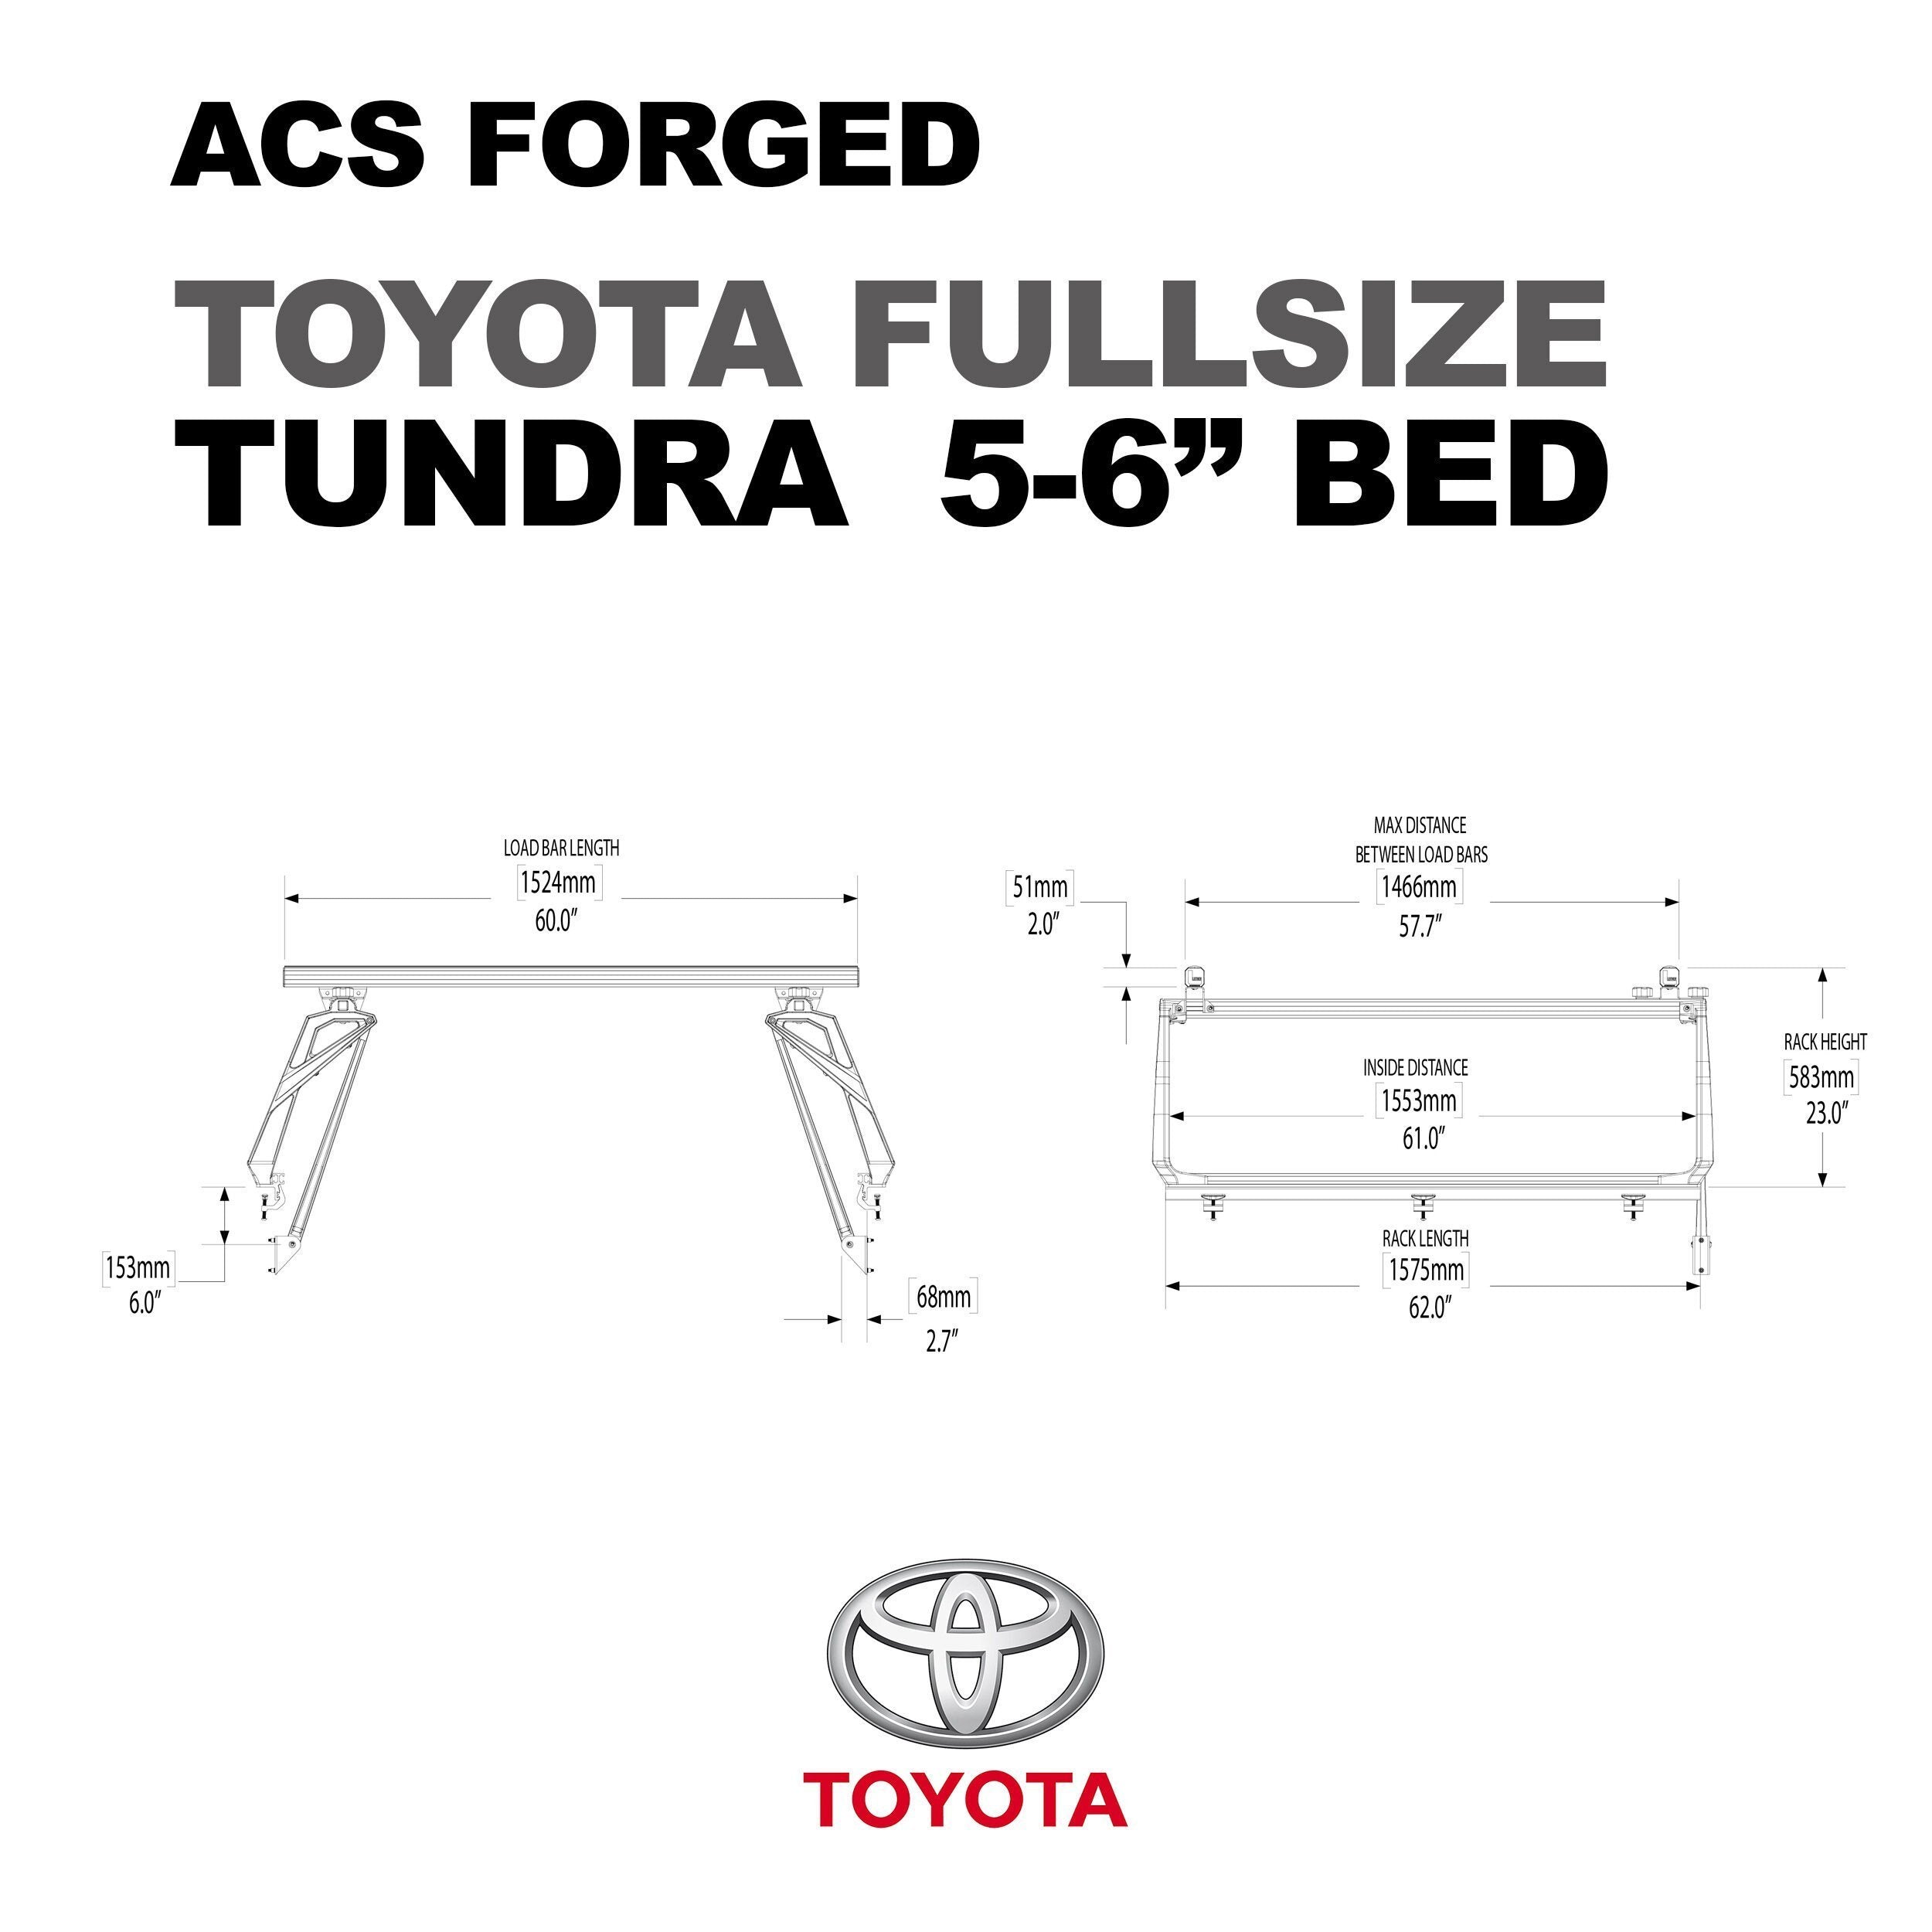 '07-21 Toyota Tundra-ACS Forged Bed Accessories Leitner Designs design